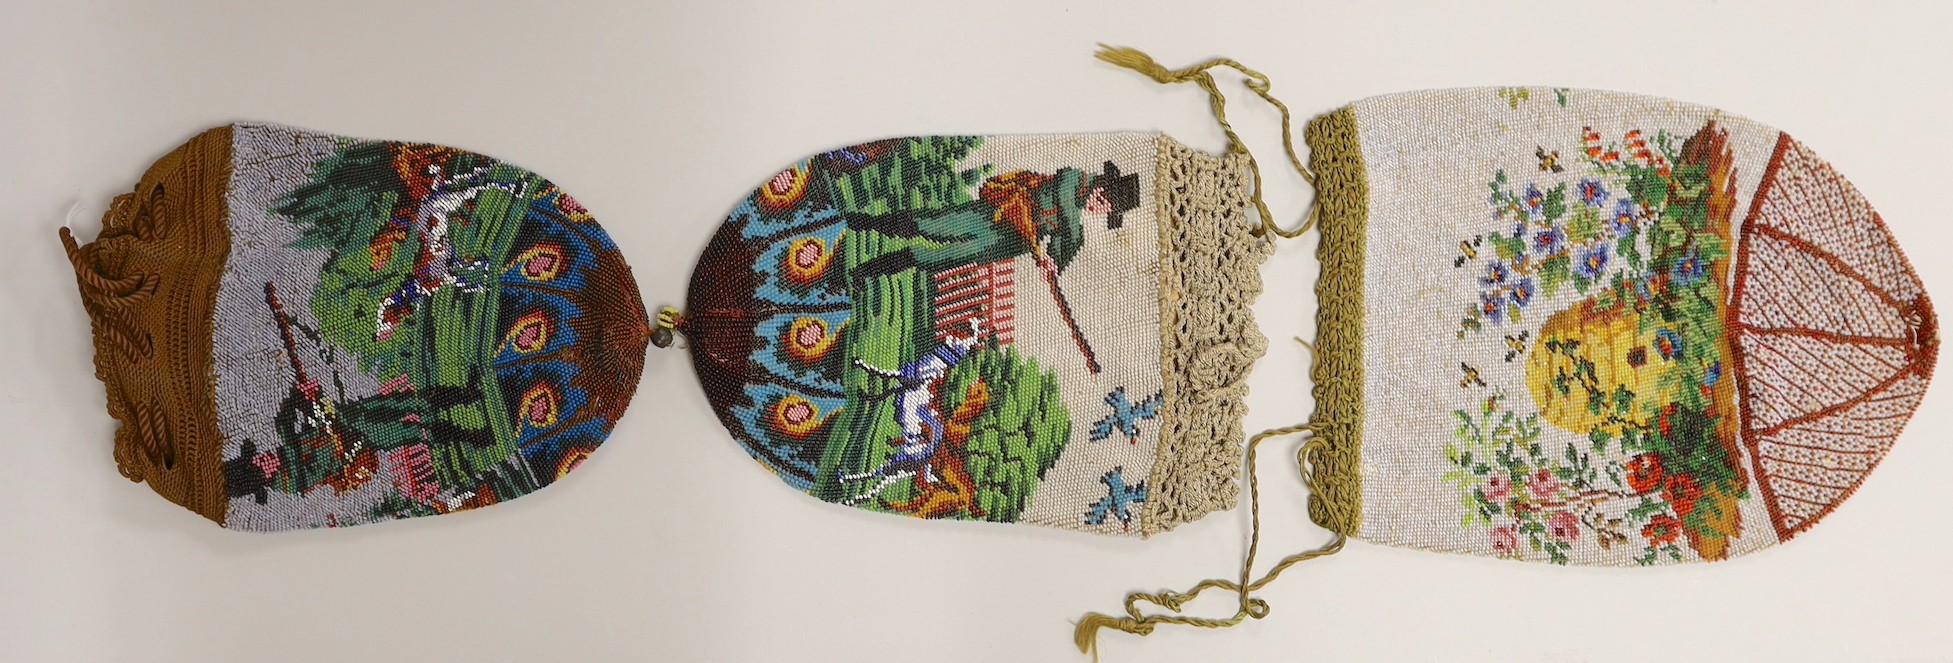 Two 19th century draw string beaded bags with hunting scenes, possibly American and a similar beaded bag depicting a bee hive in a garden.